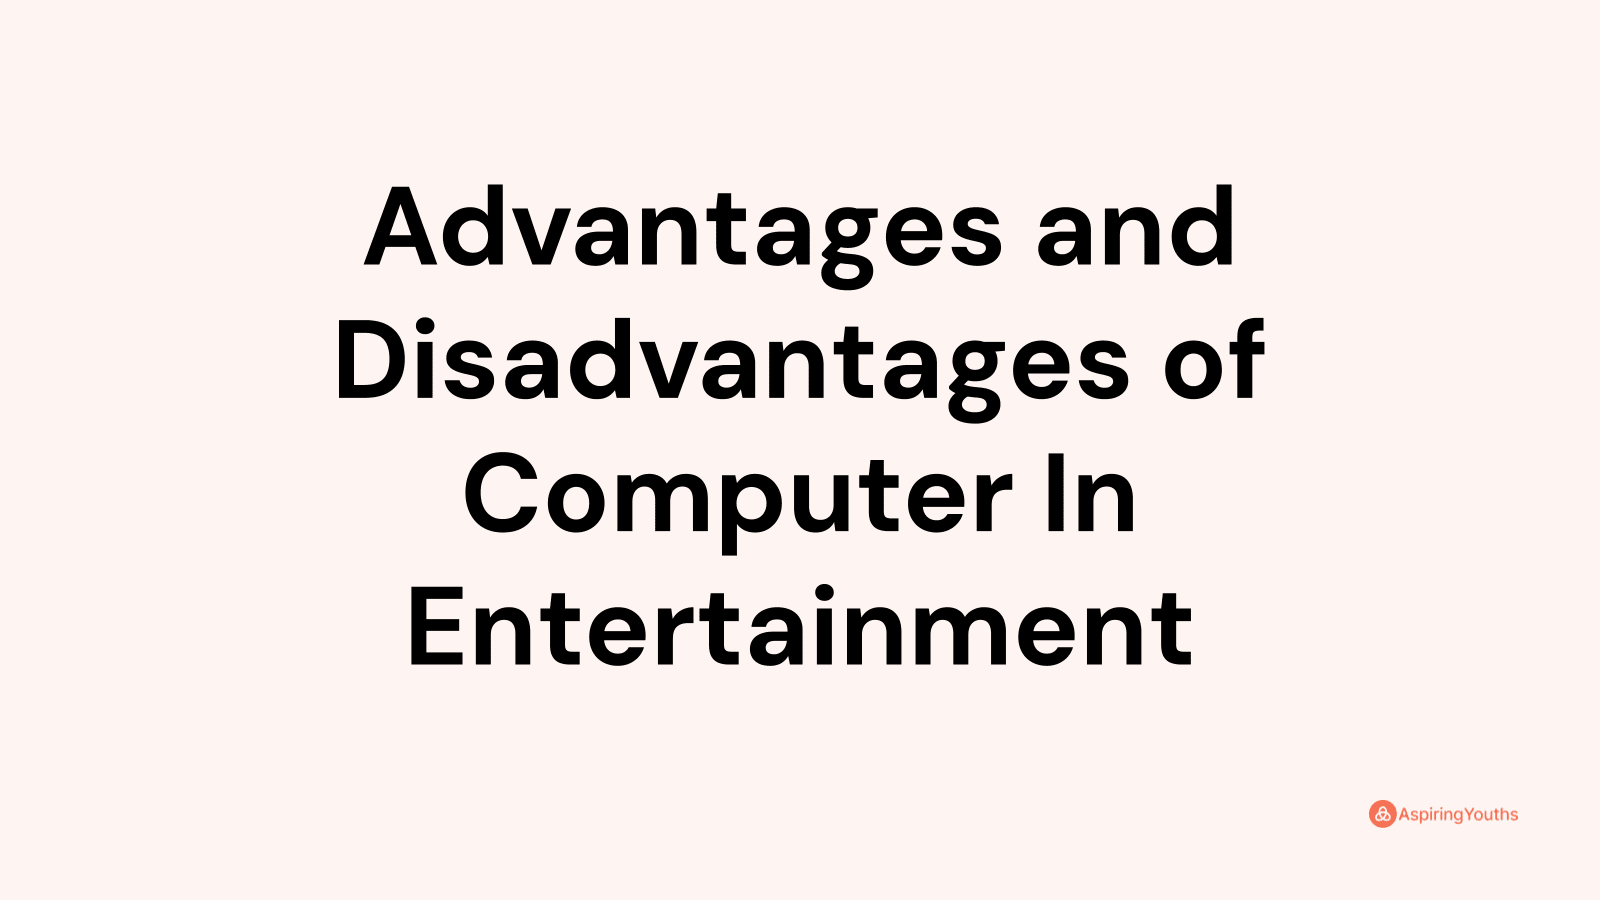 Advantages and disadvantages of Computer In Entertainment